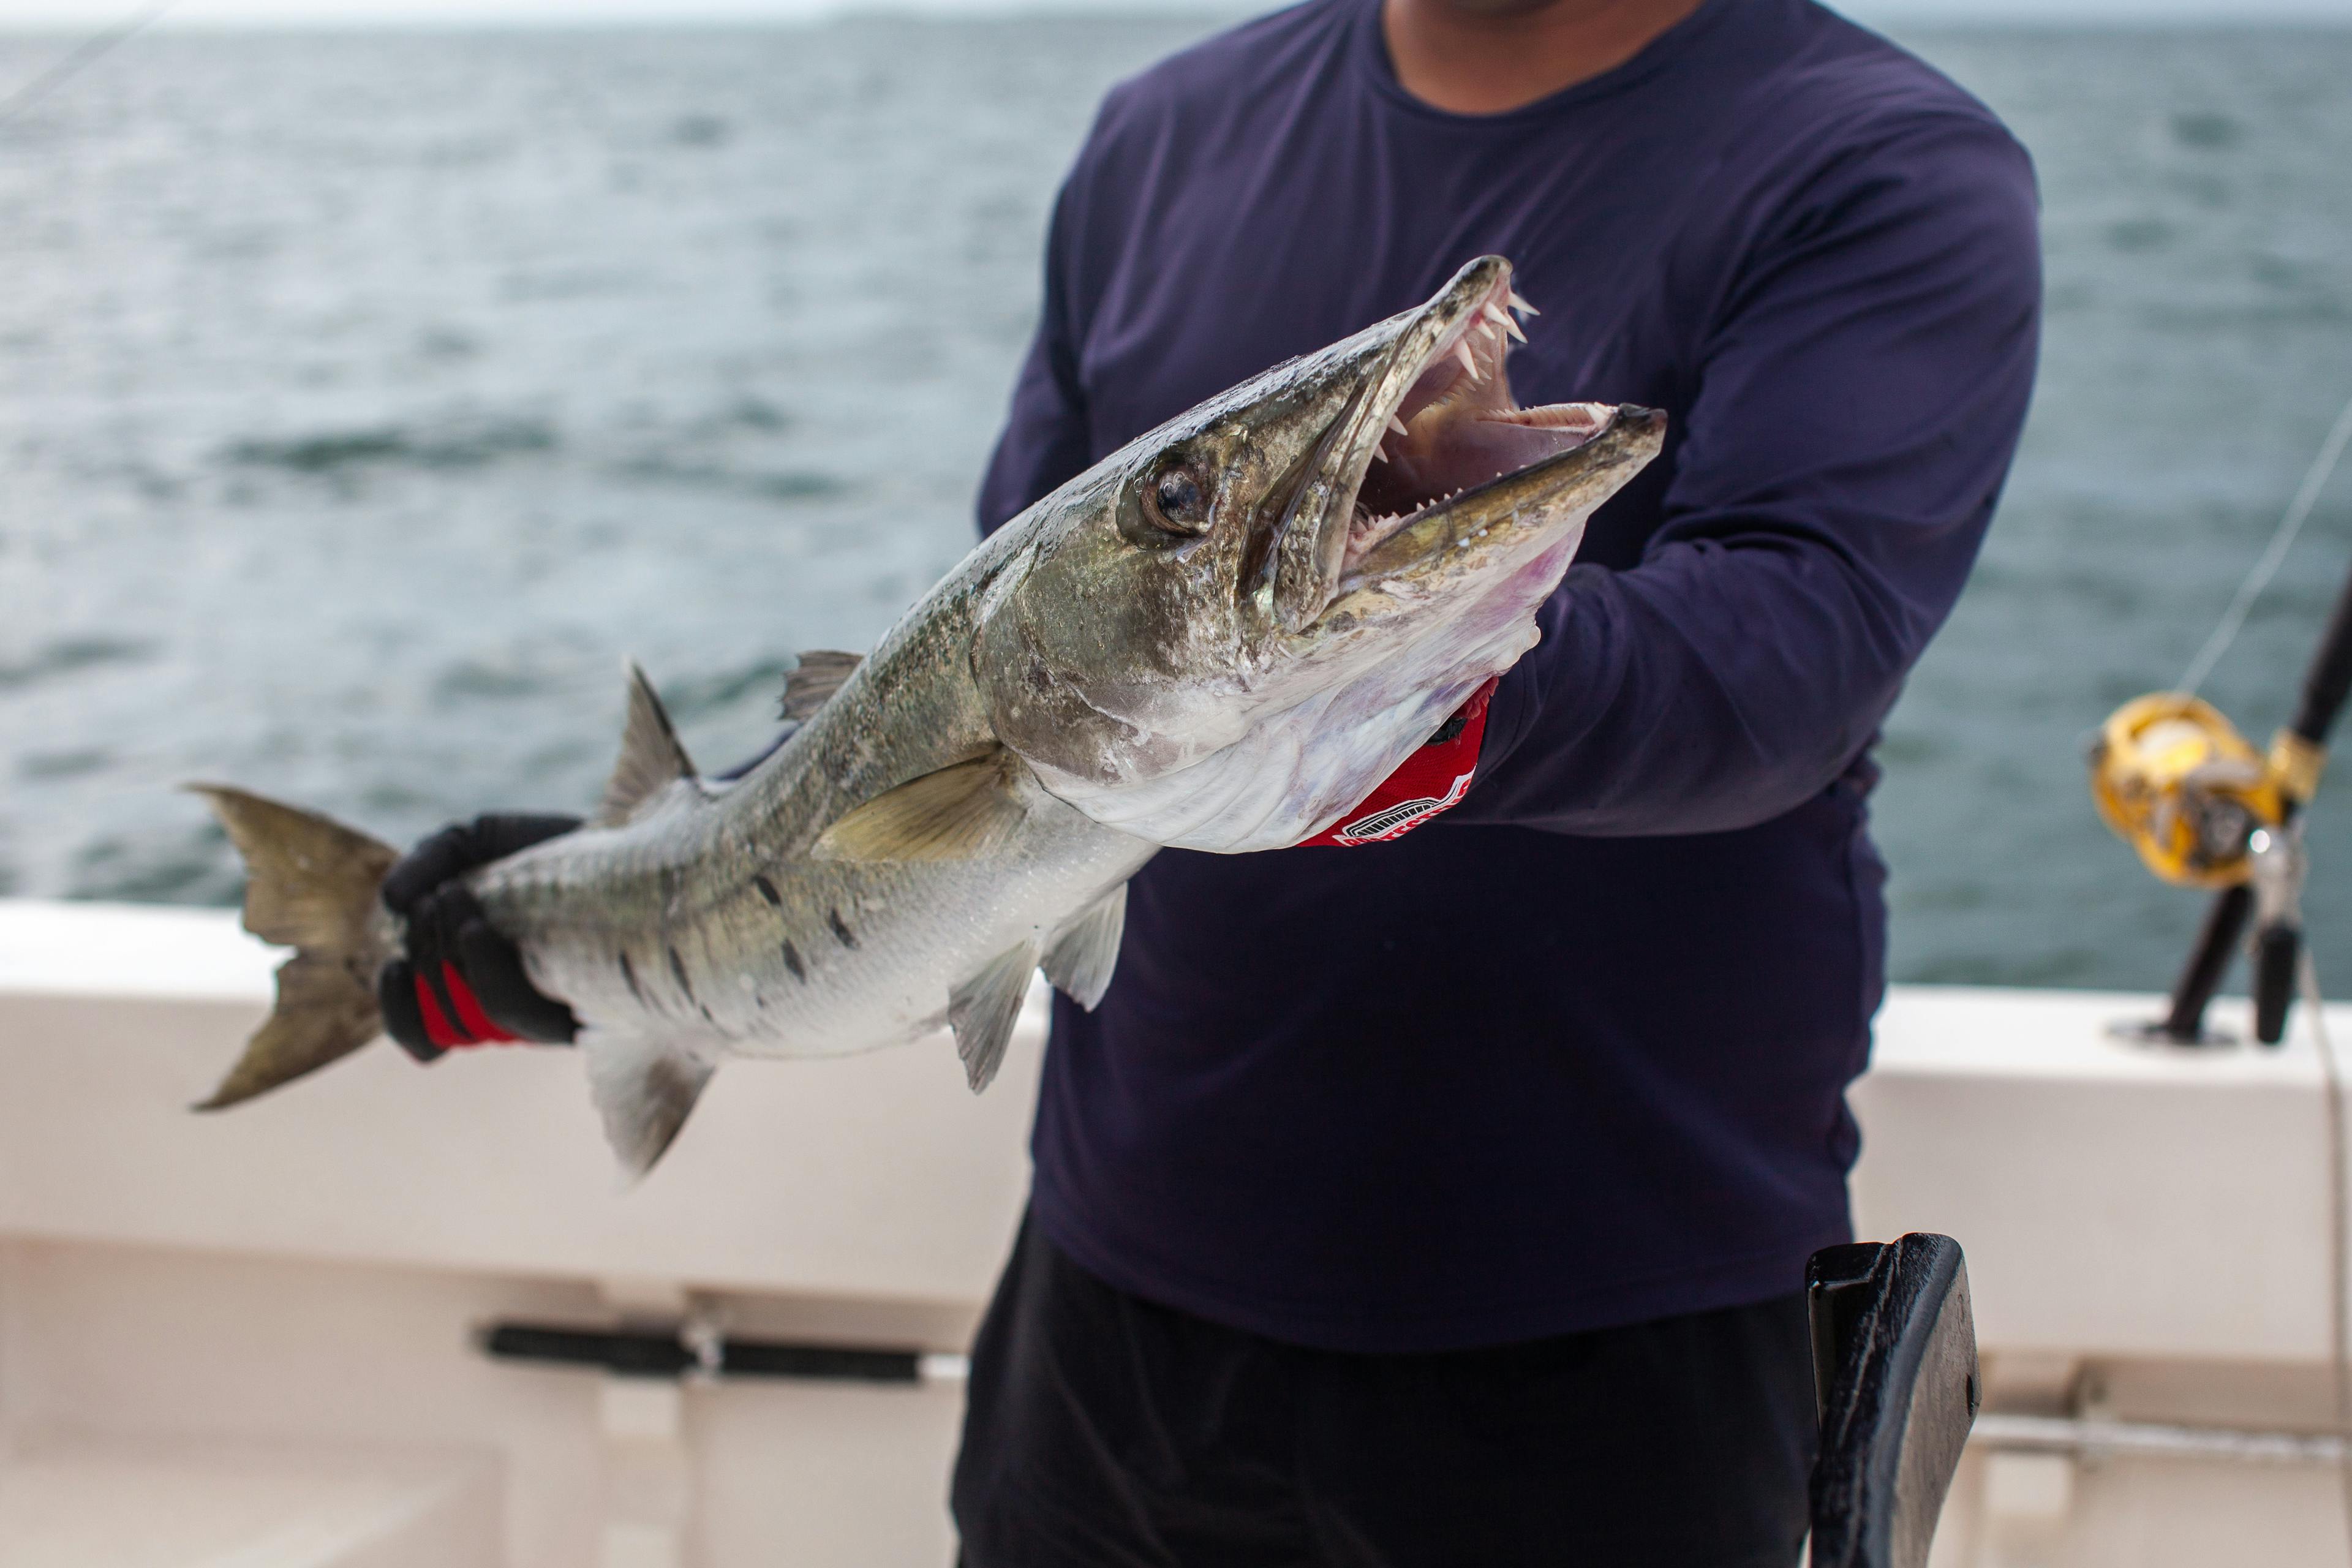 Get your next big catch with fishing guides on Boaters List!